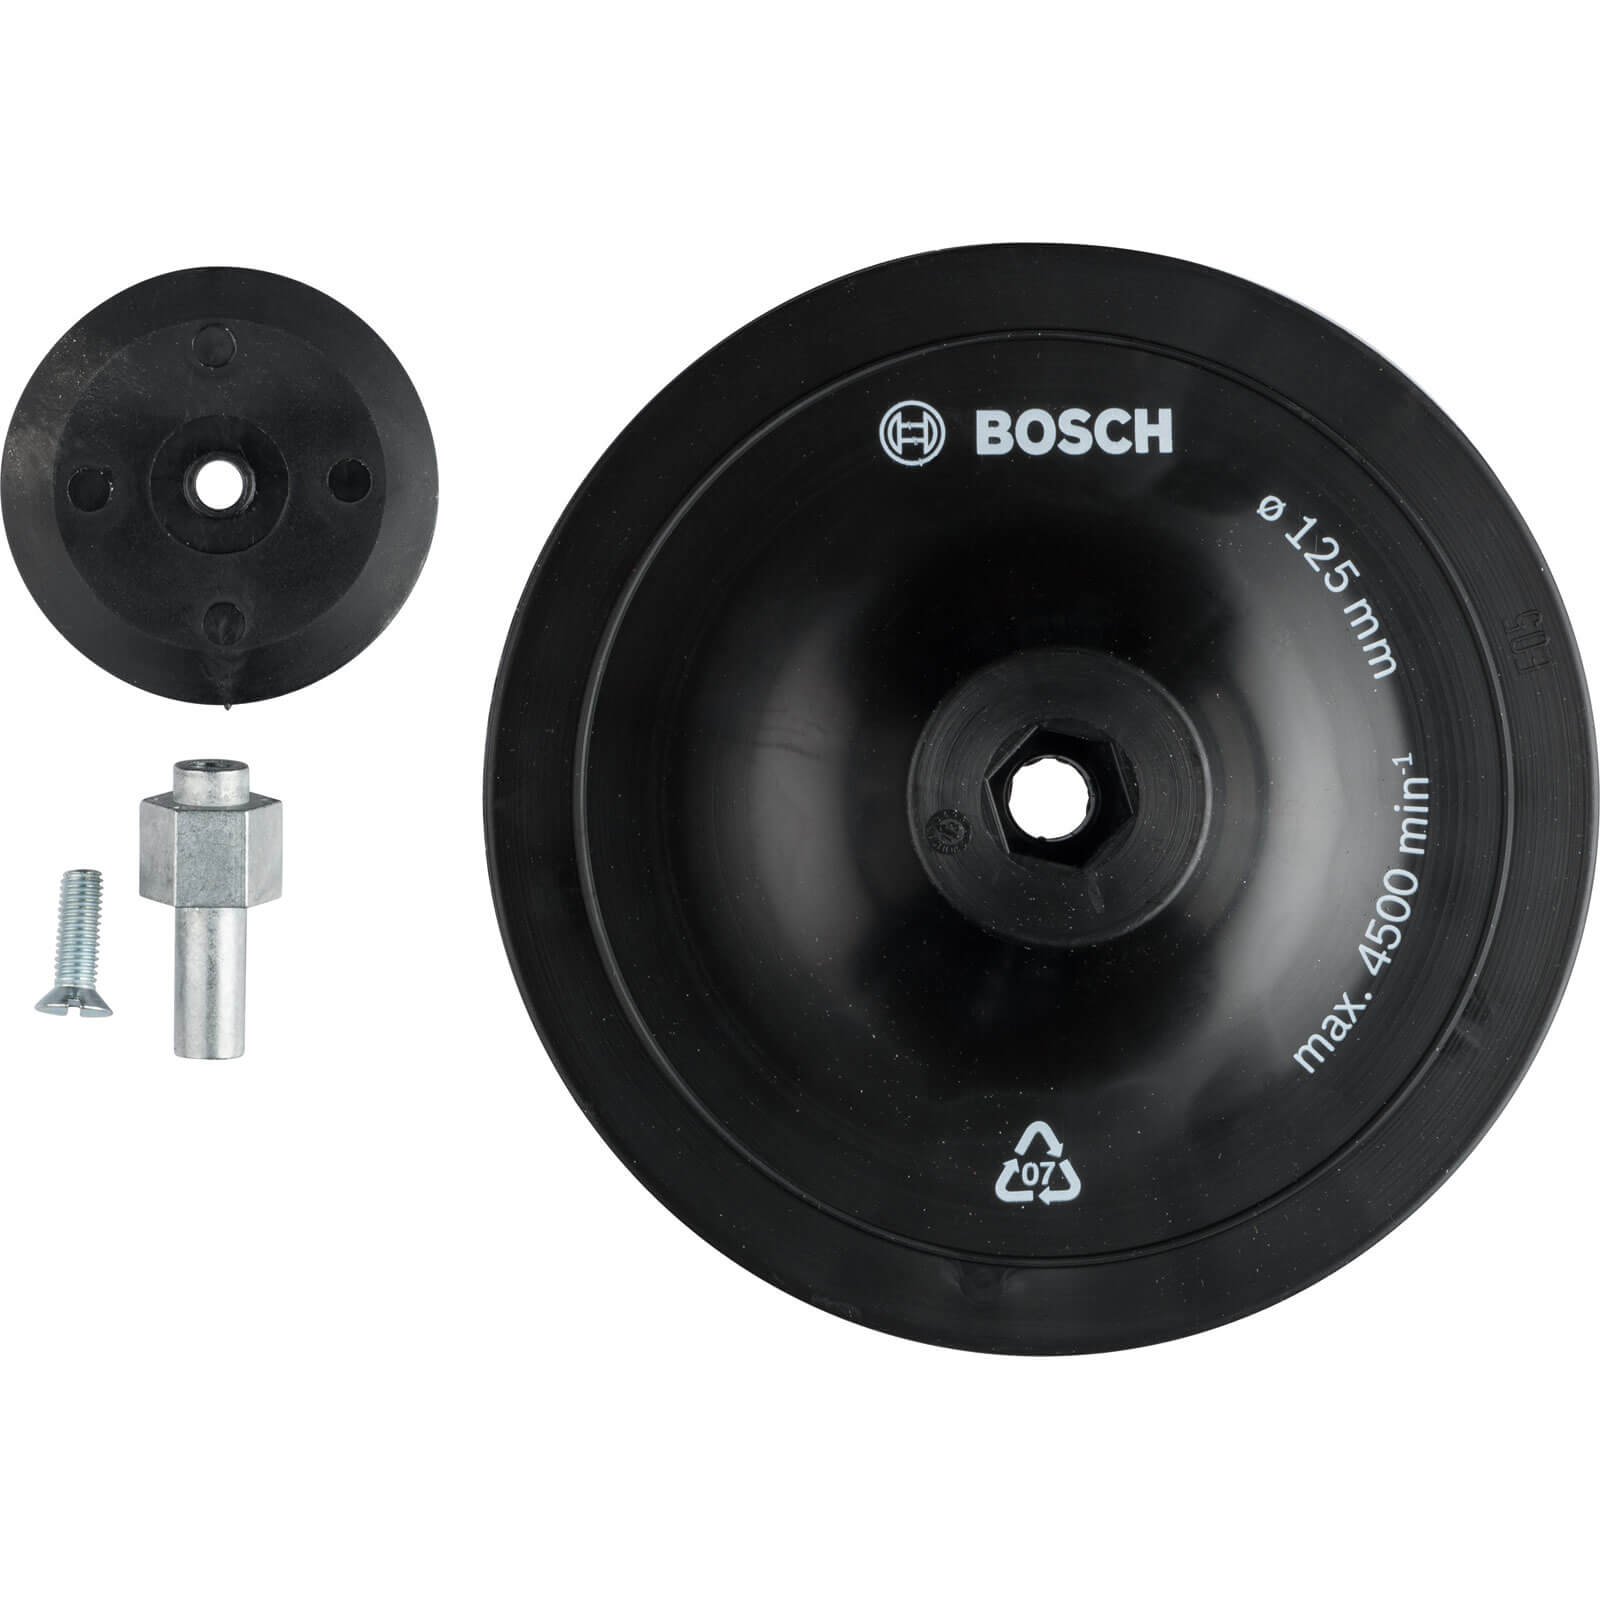 Photo of Bosch Backing Pad And Shank For Drills 125mm